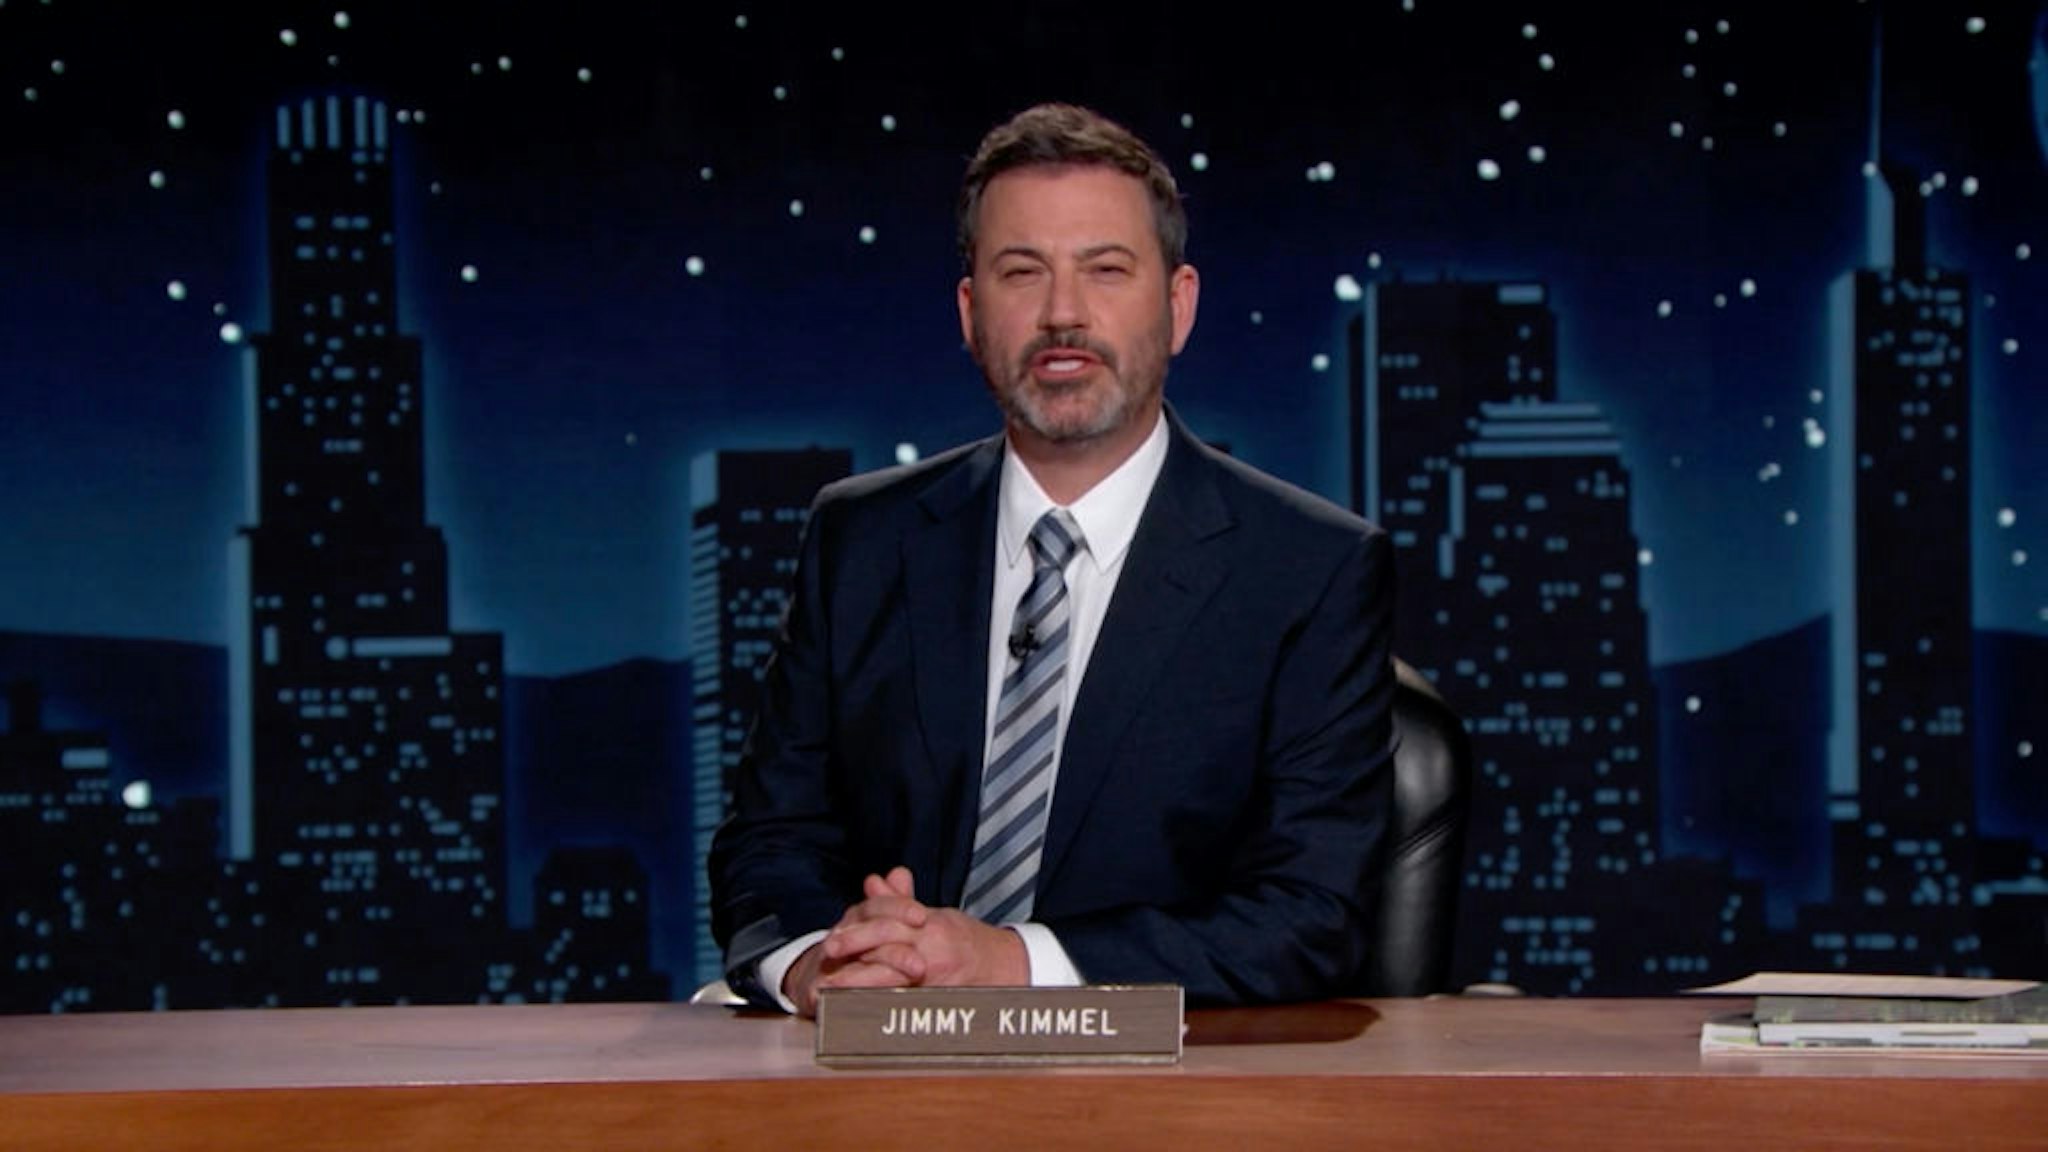 In this screengrab, Jimmy Kimmel speaks during the 2020 Media Access Awards Presented By Easterseals on November 19, 2020 in UNSPECIFIED, United States.